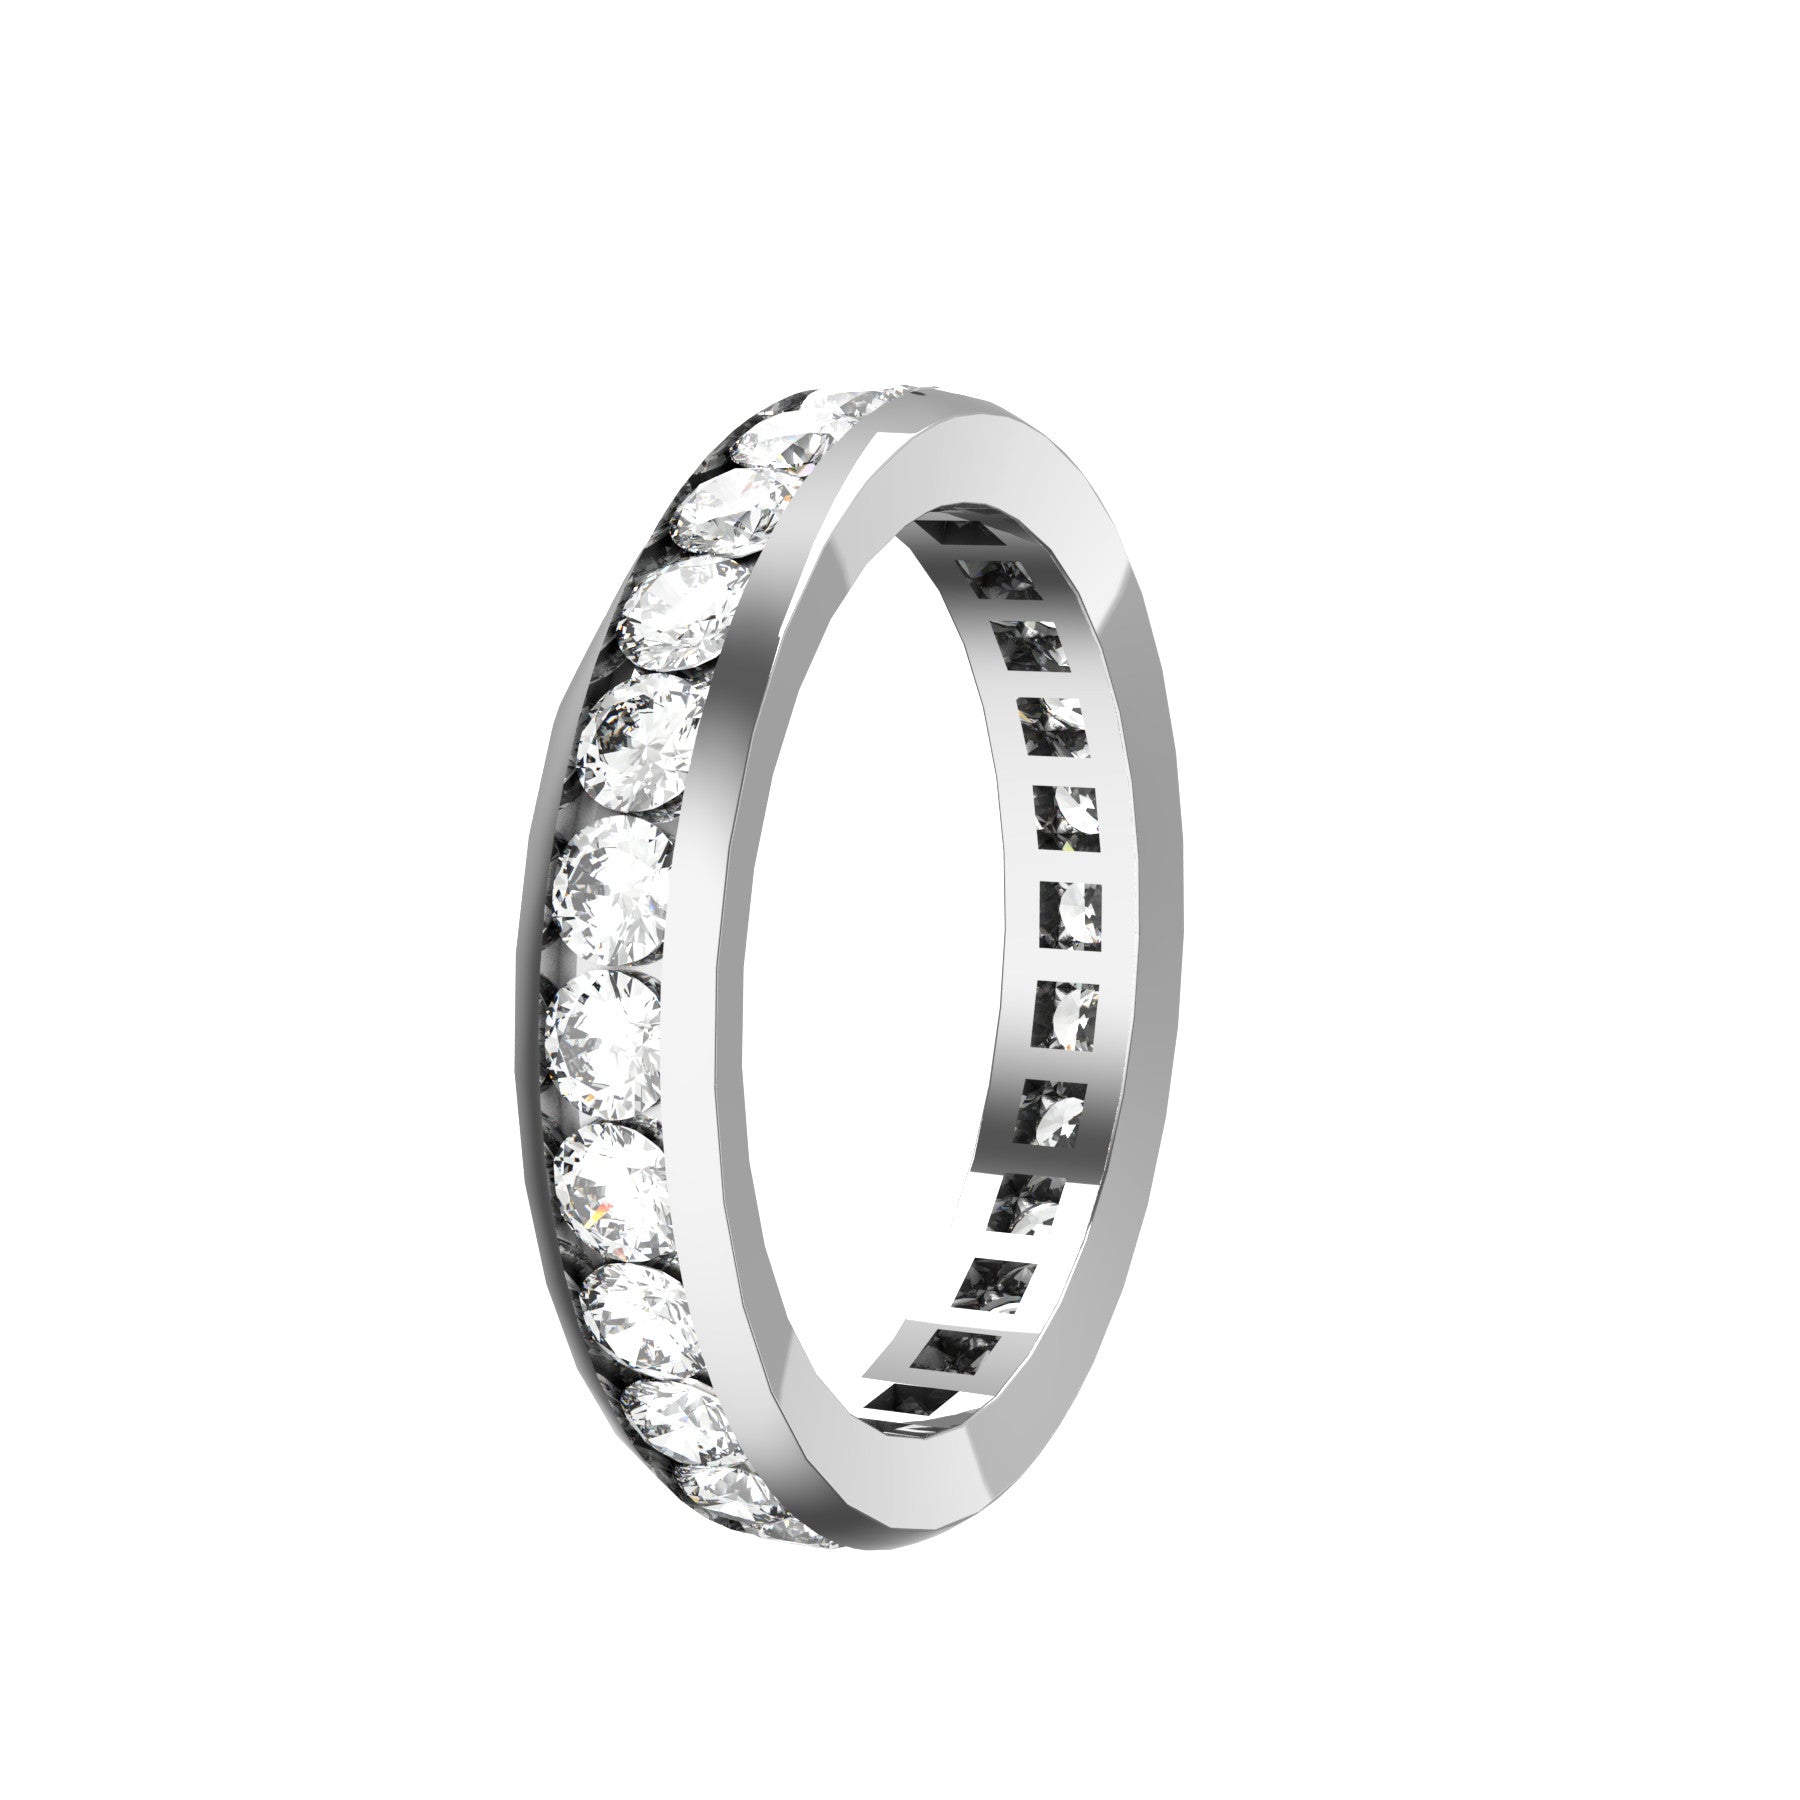  everlasting wedding band, 18 k white gold, 0,05 ct round natural diamonds, weight about 3,50 g. (0,12 oz), width 3,70 mm